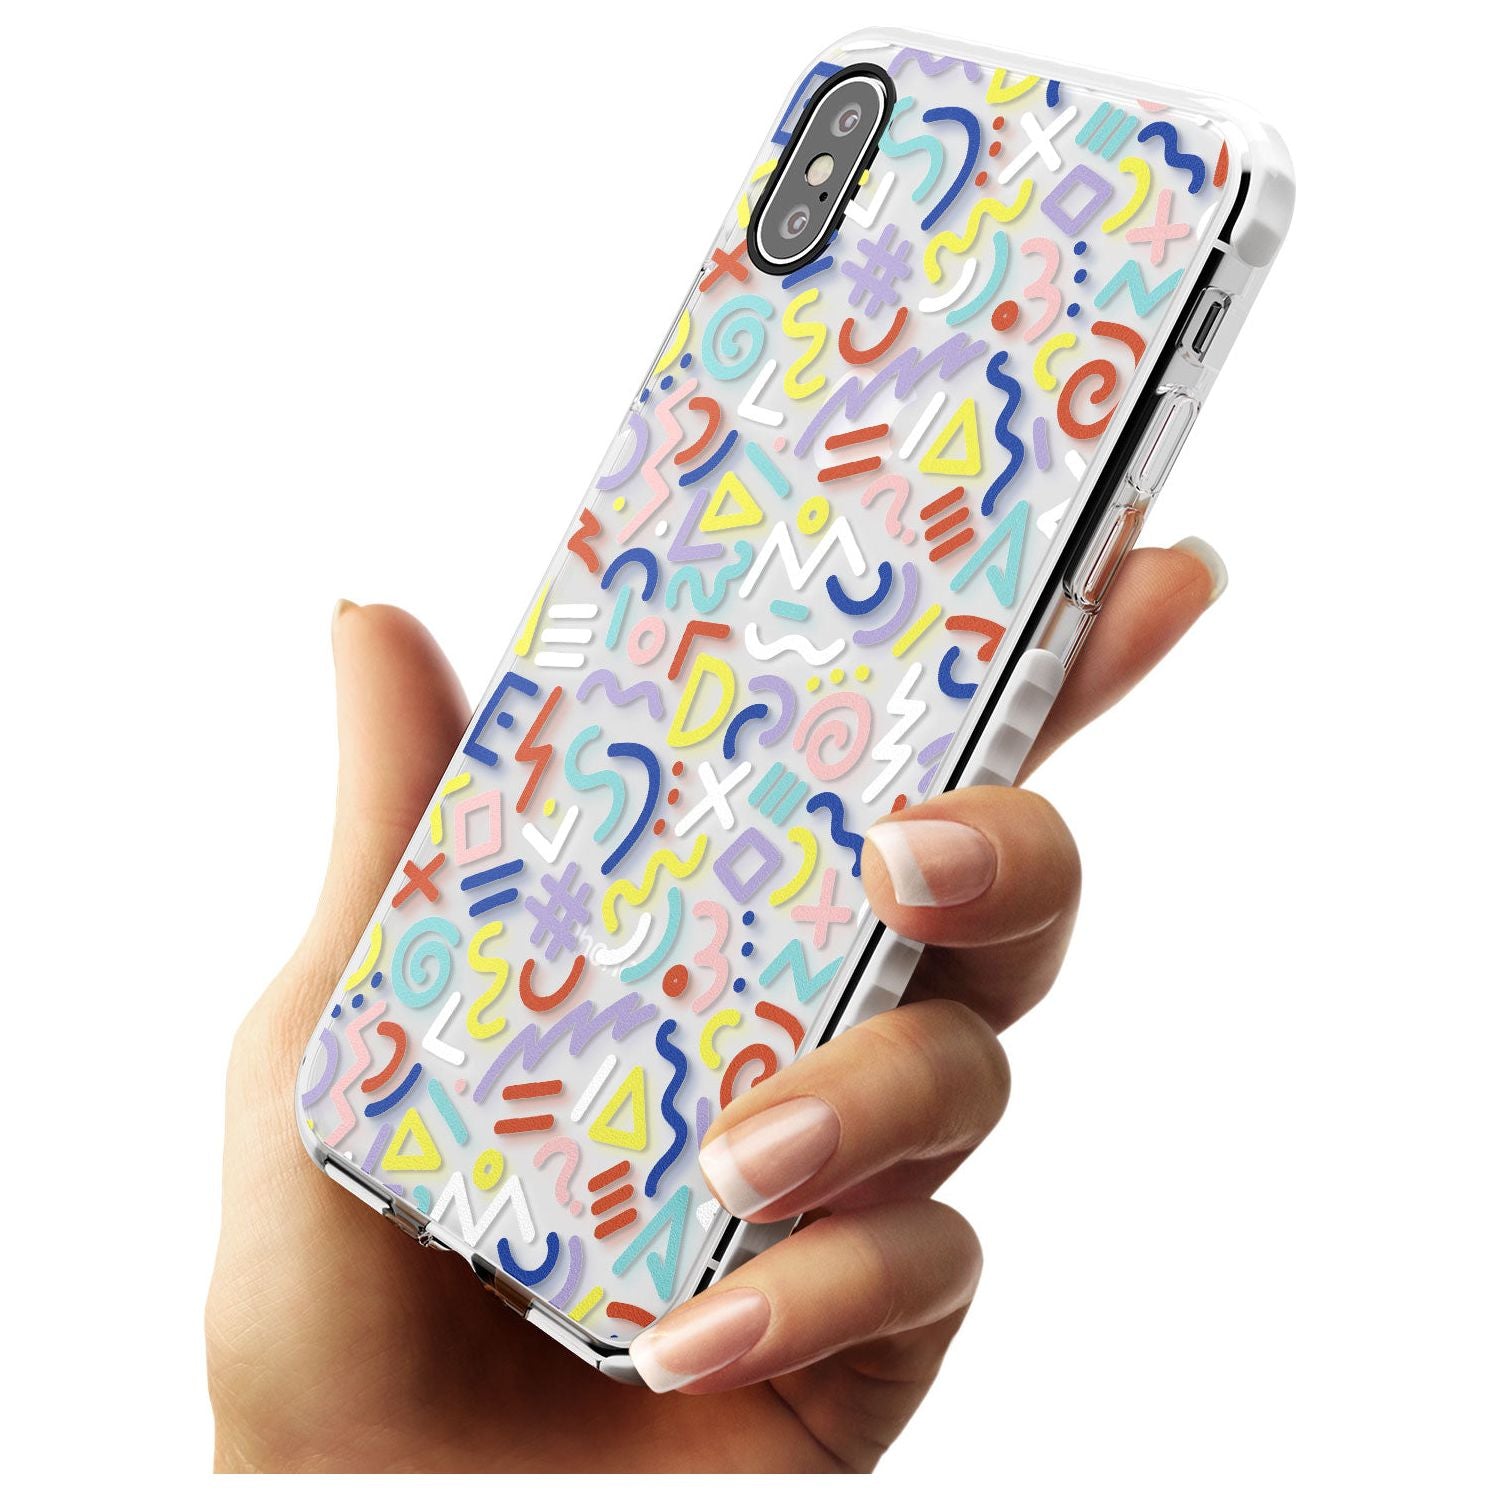 Colourful Mixed Shapes Retro Pattern Design Impact Phone Case for iPhone X XS Max XR